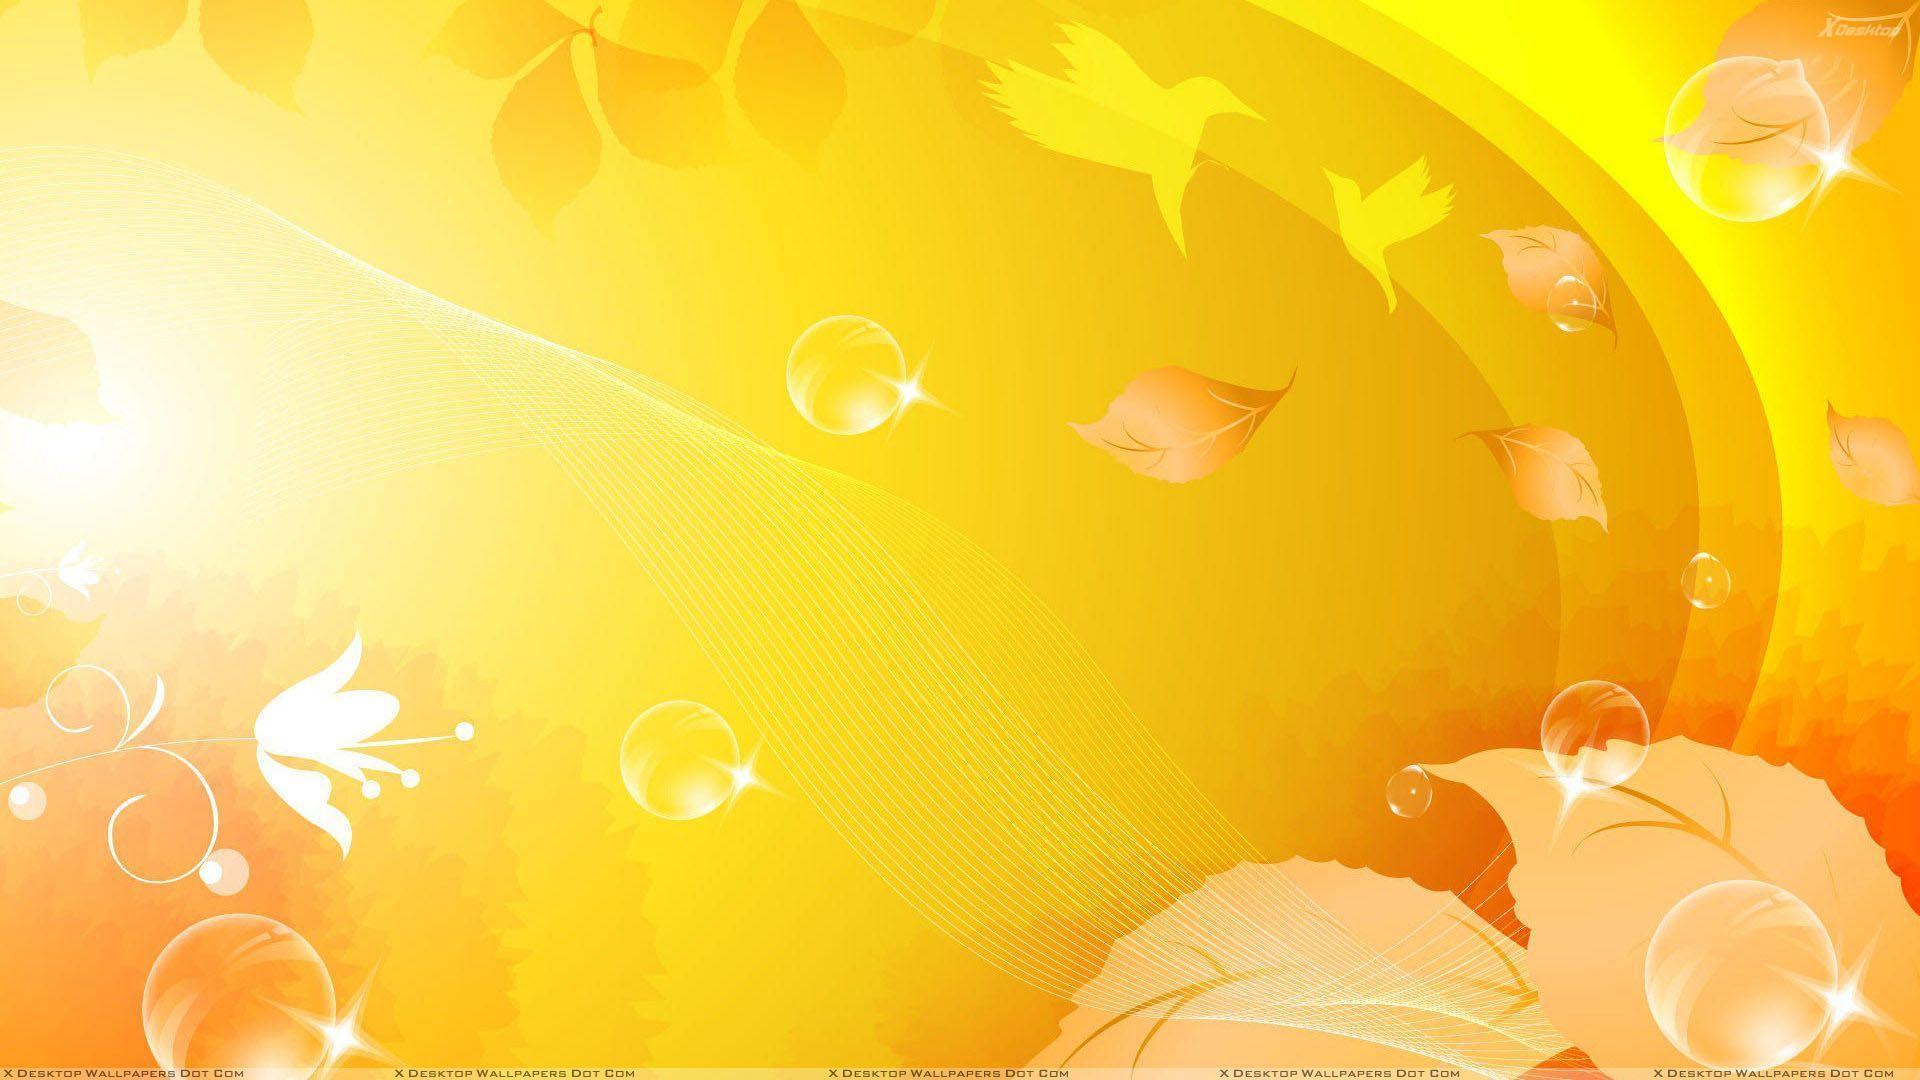 Wallpaper For > Yellow Background Wallpaper